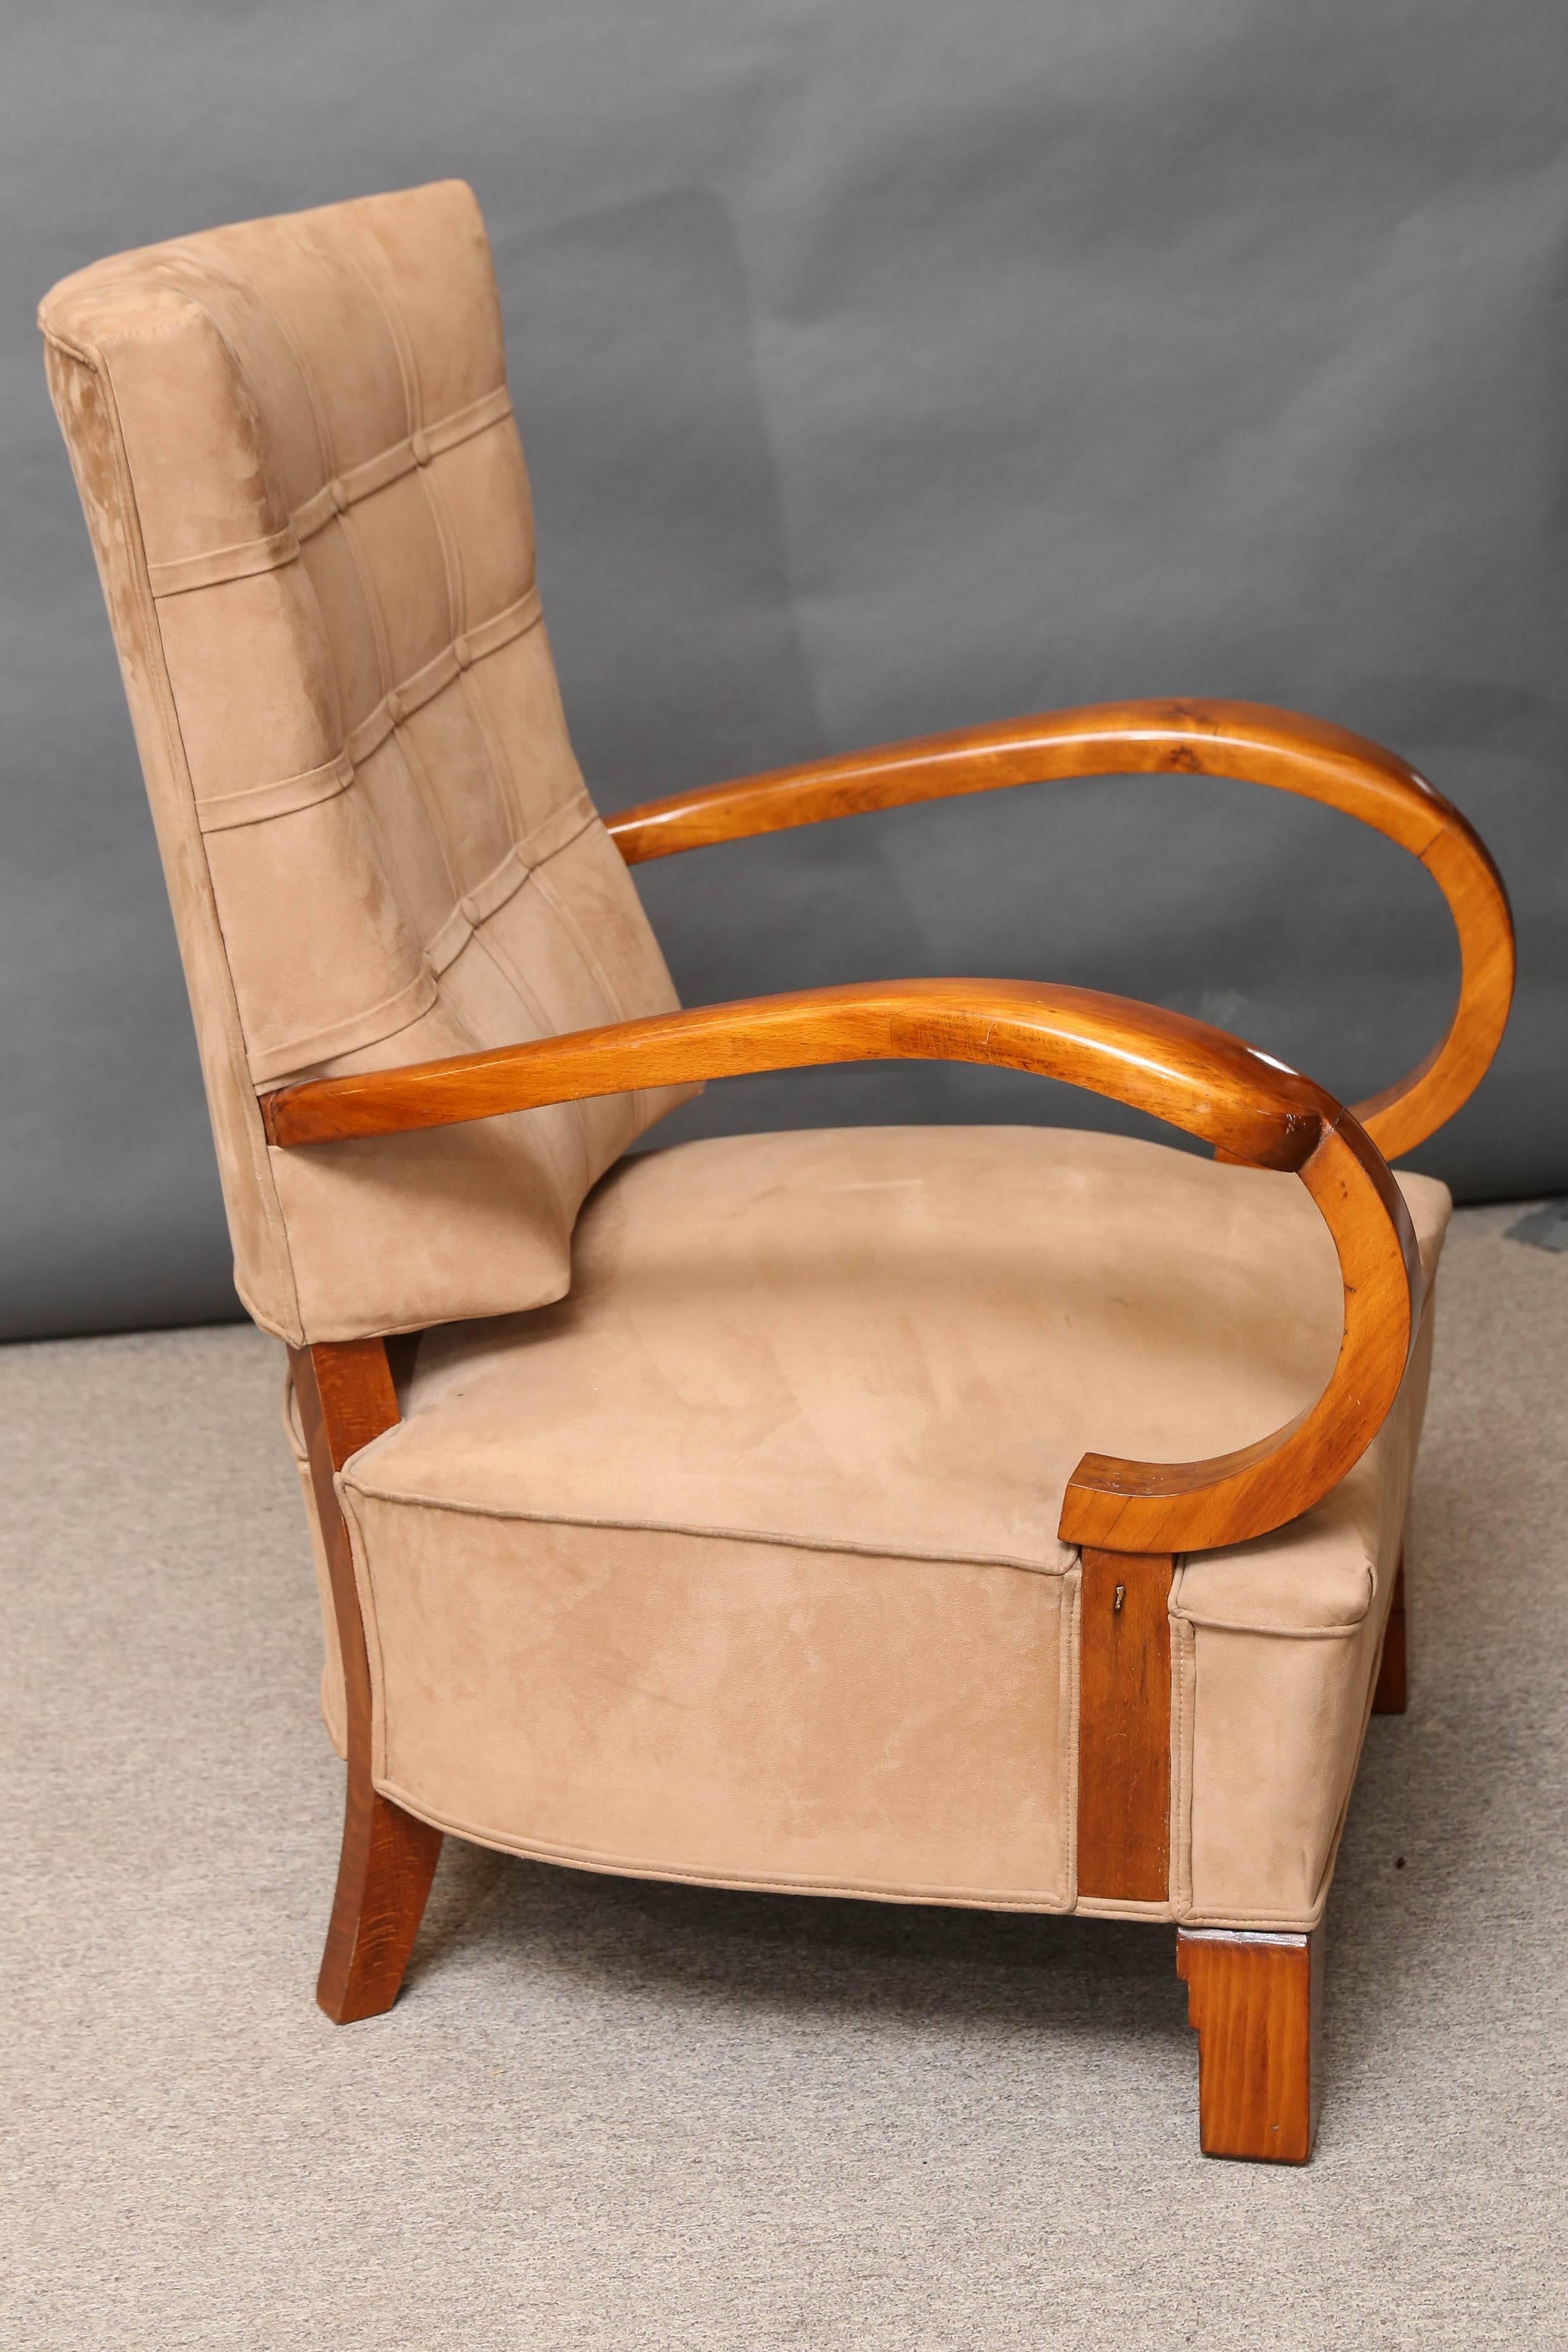 Austrian Mid-Century Chair and Foot Rest in Walnut In Excellent Condition For Sale In Houston, TX